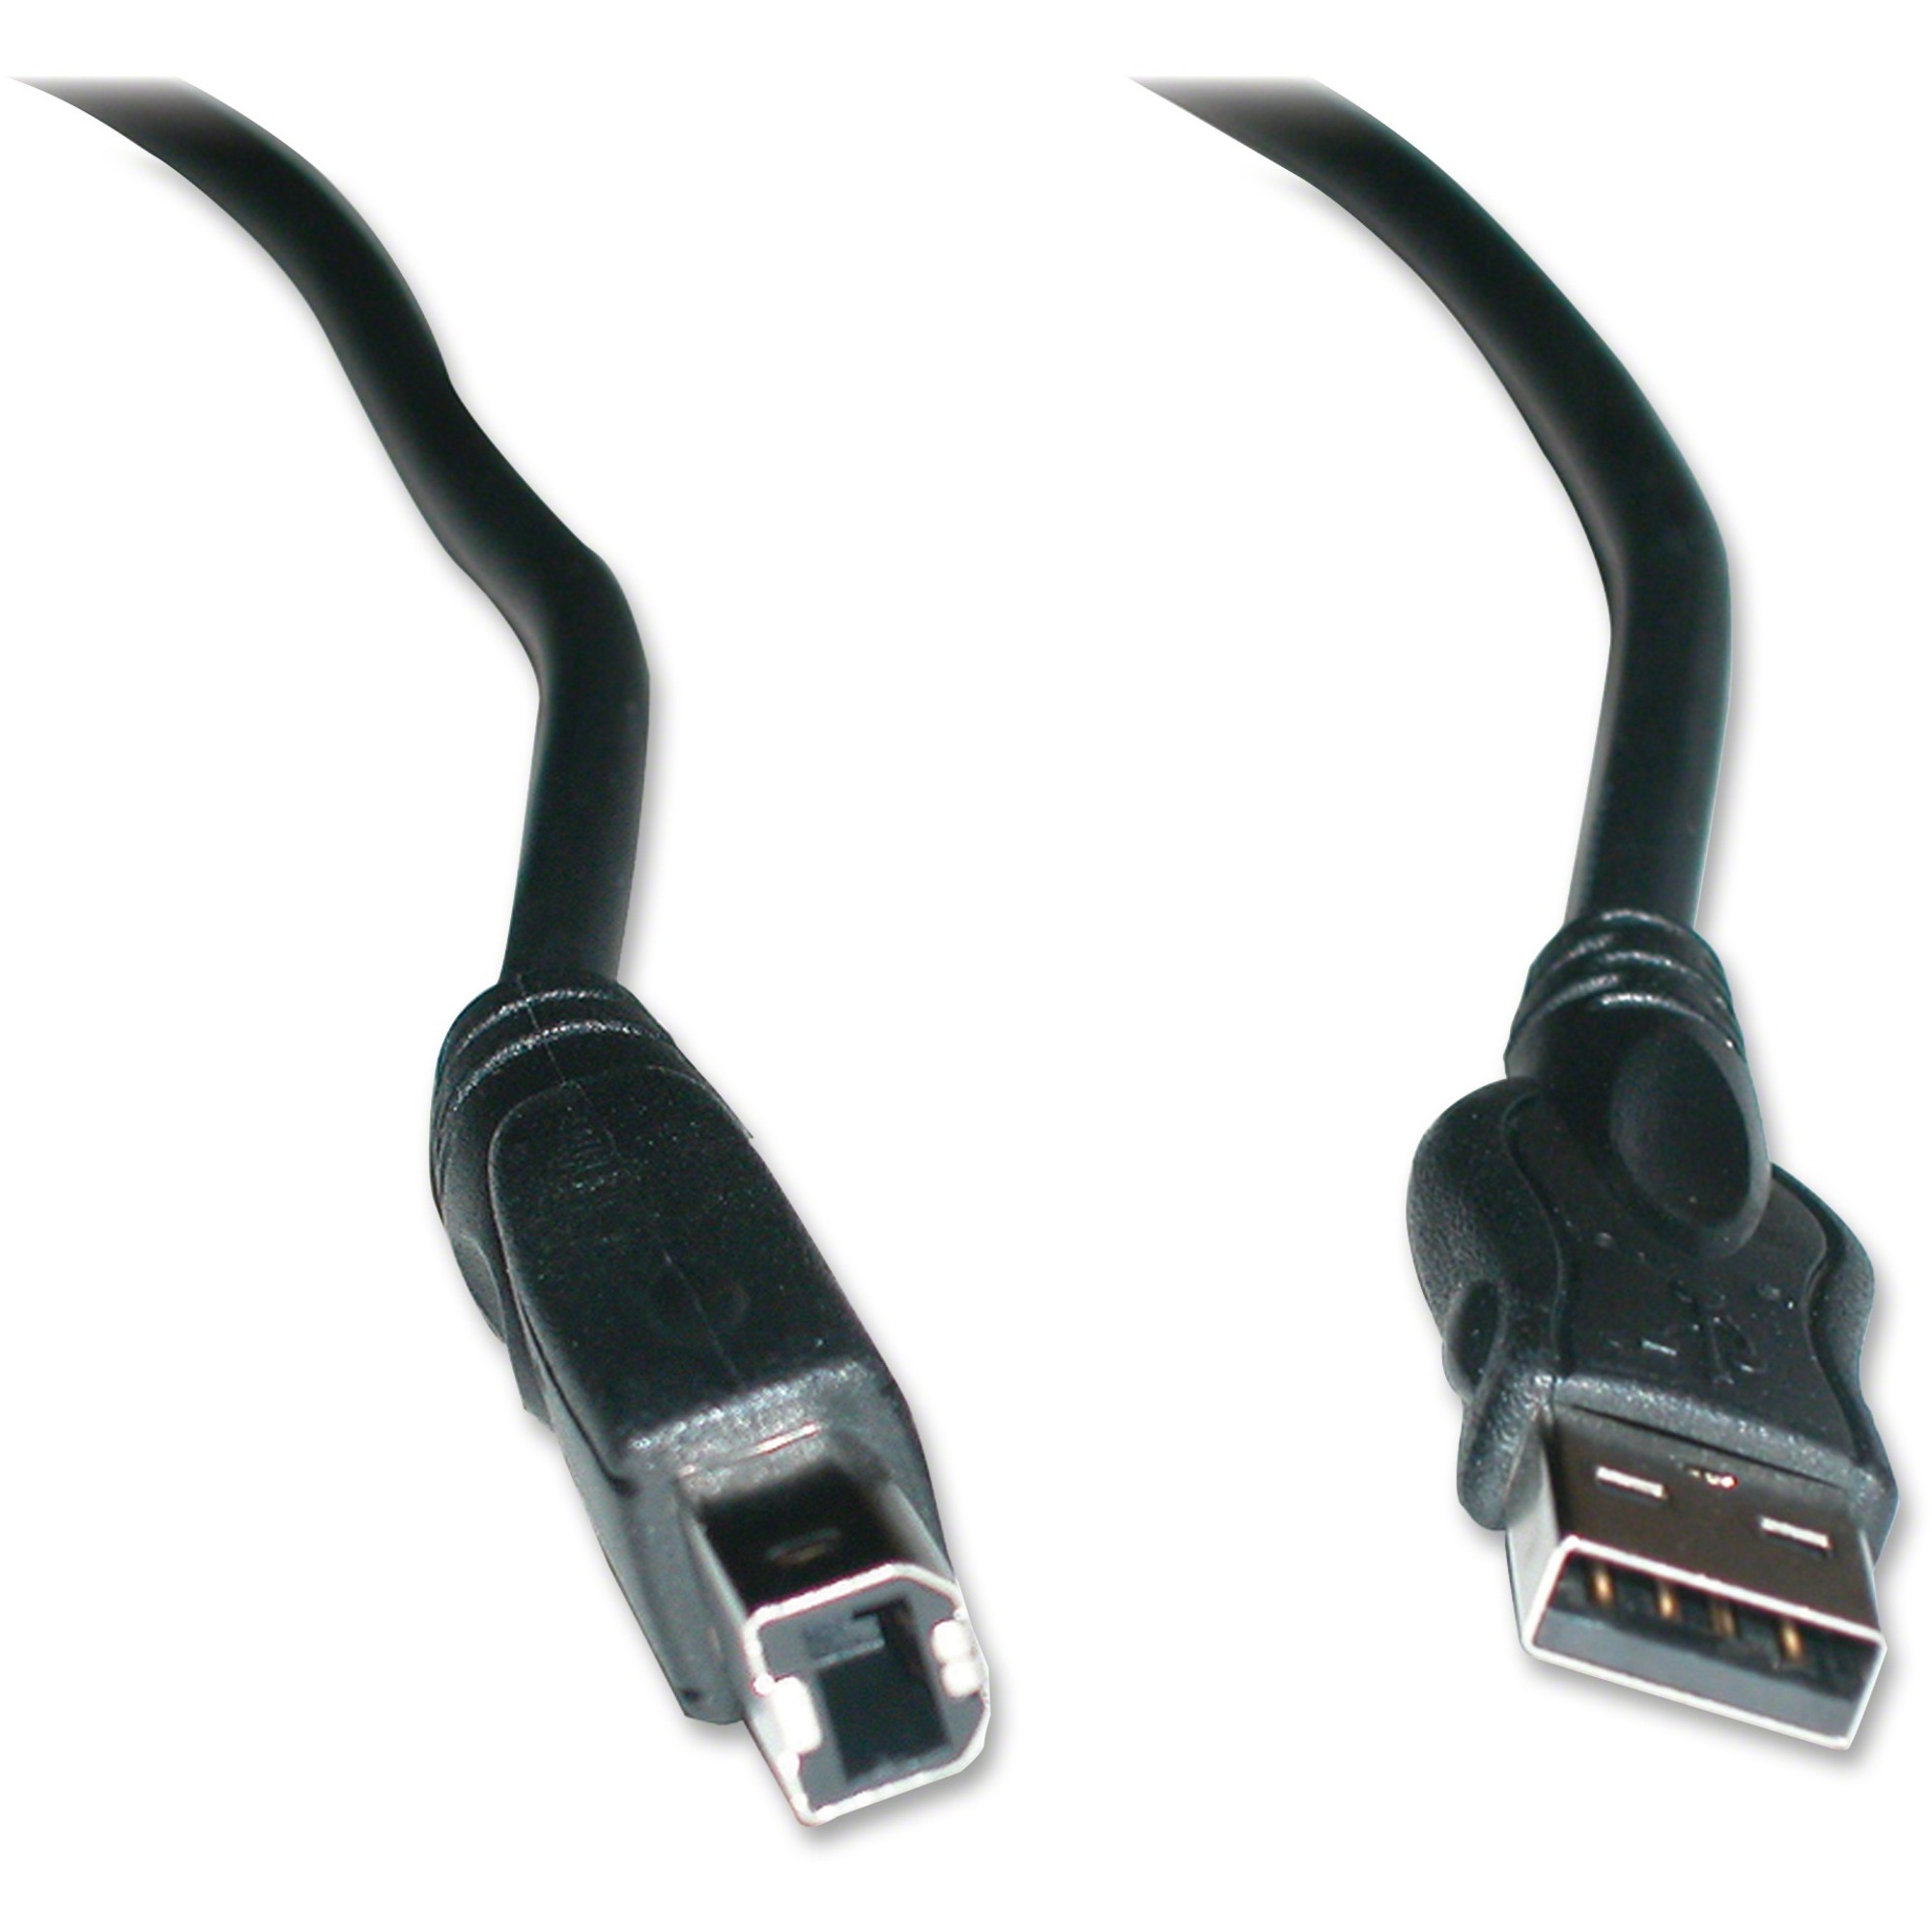 Exponent Microport USB Cable 2.0 - Each